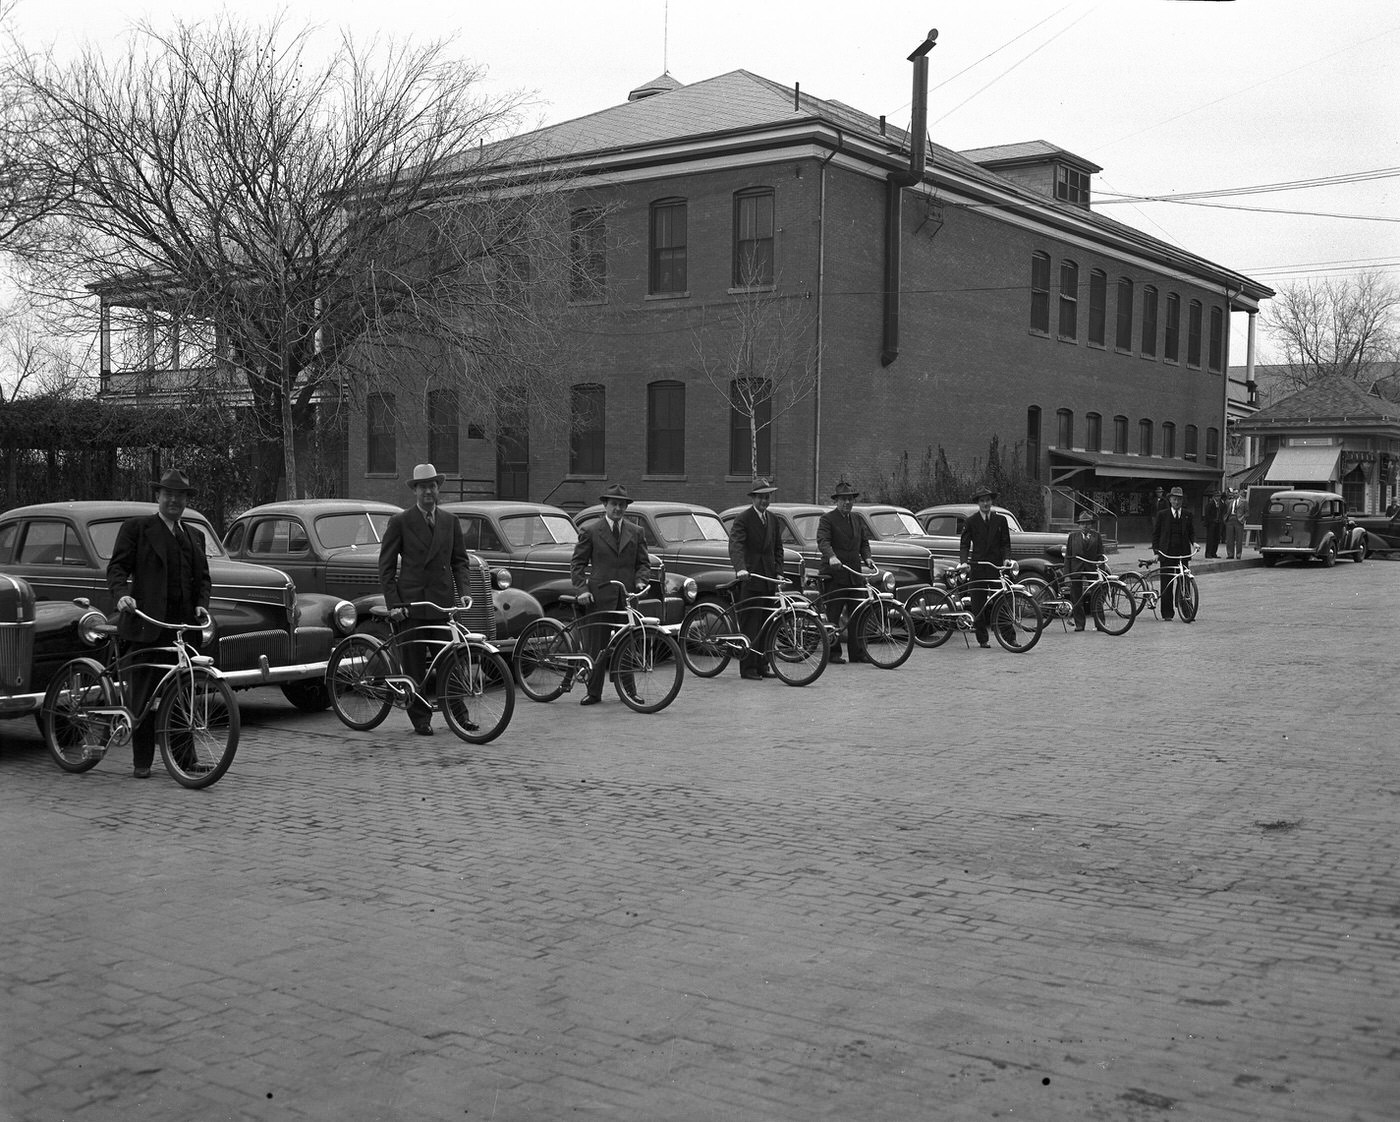 Swift & Company employees exchanging bicycles for cars, 1942